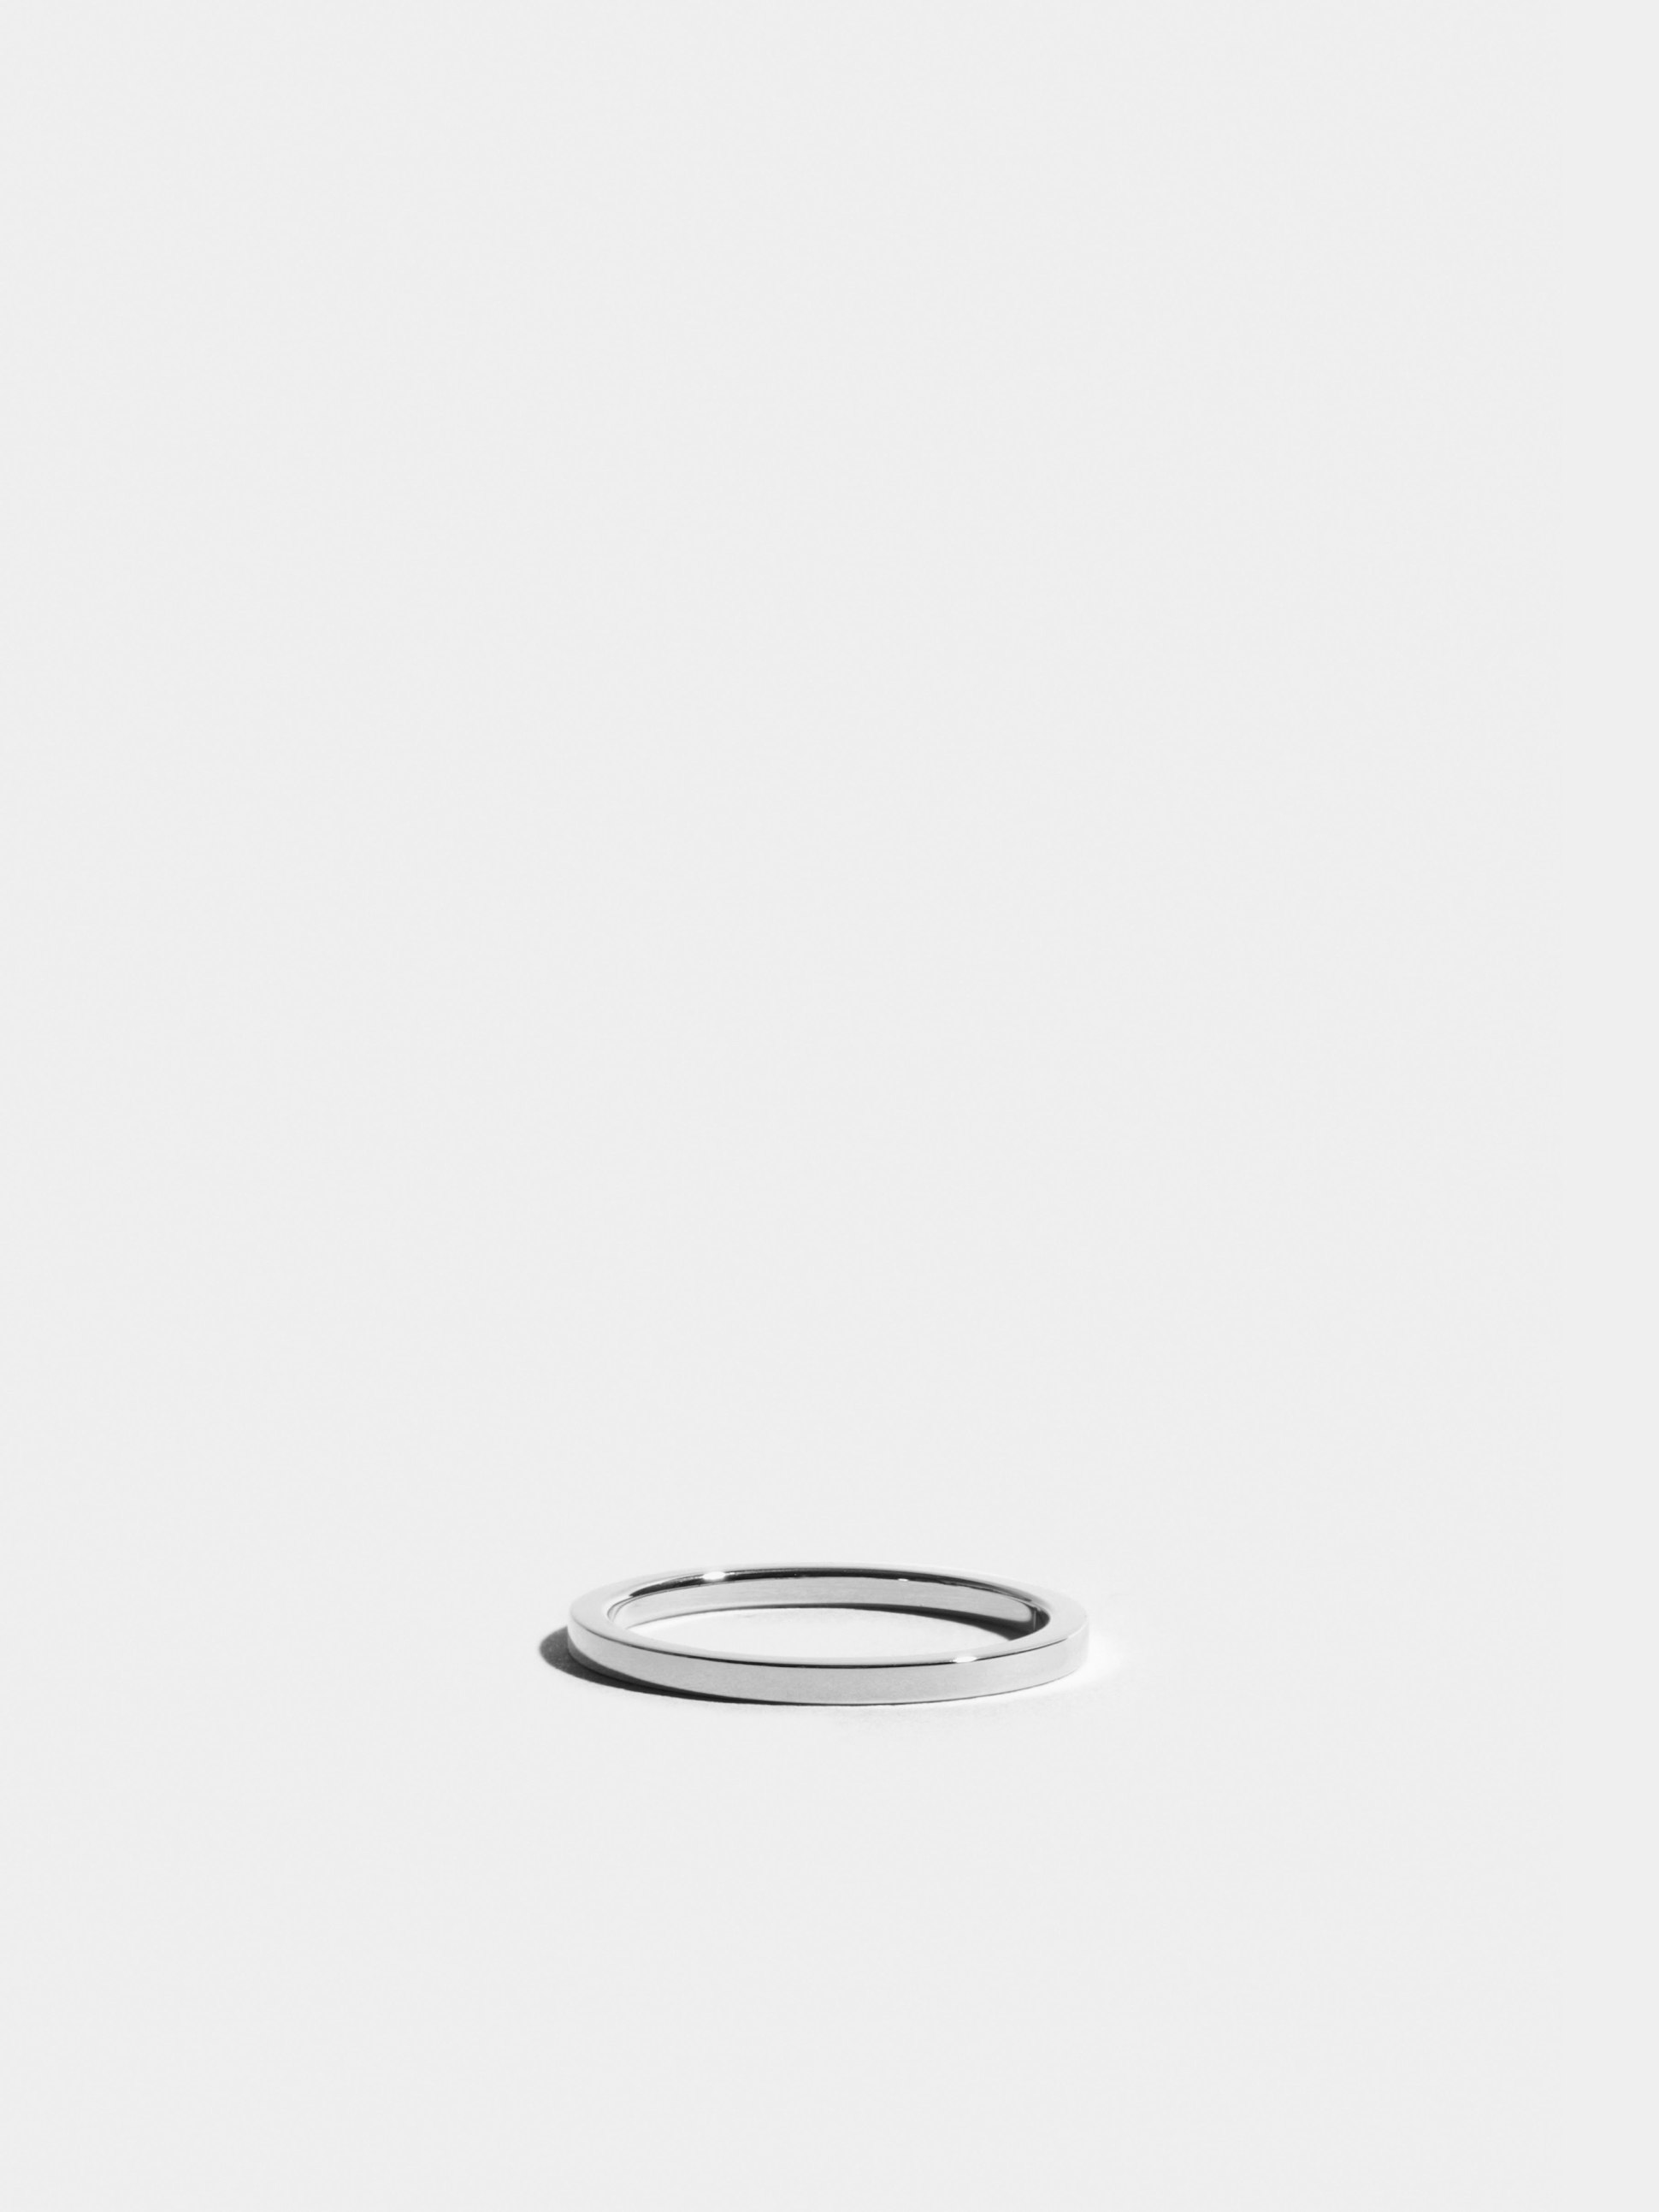 Anagramme "biseau" ring in 18k Fairmined ethical white gold